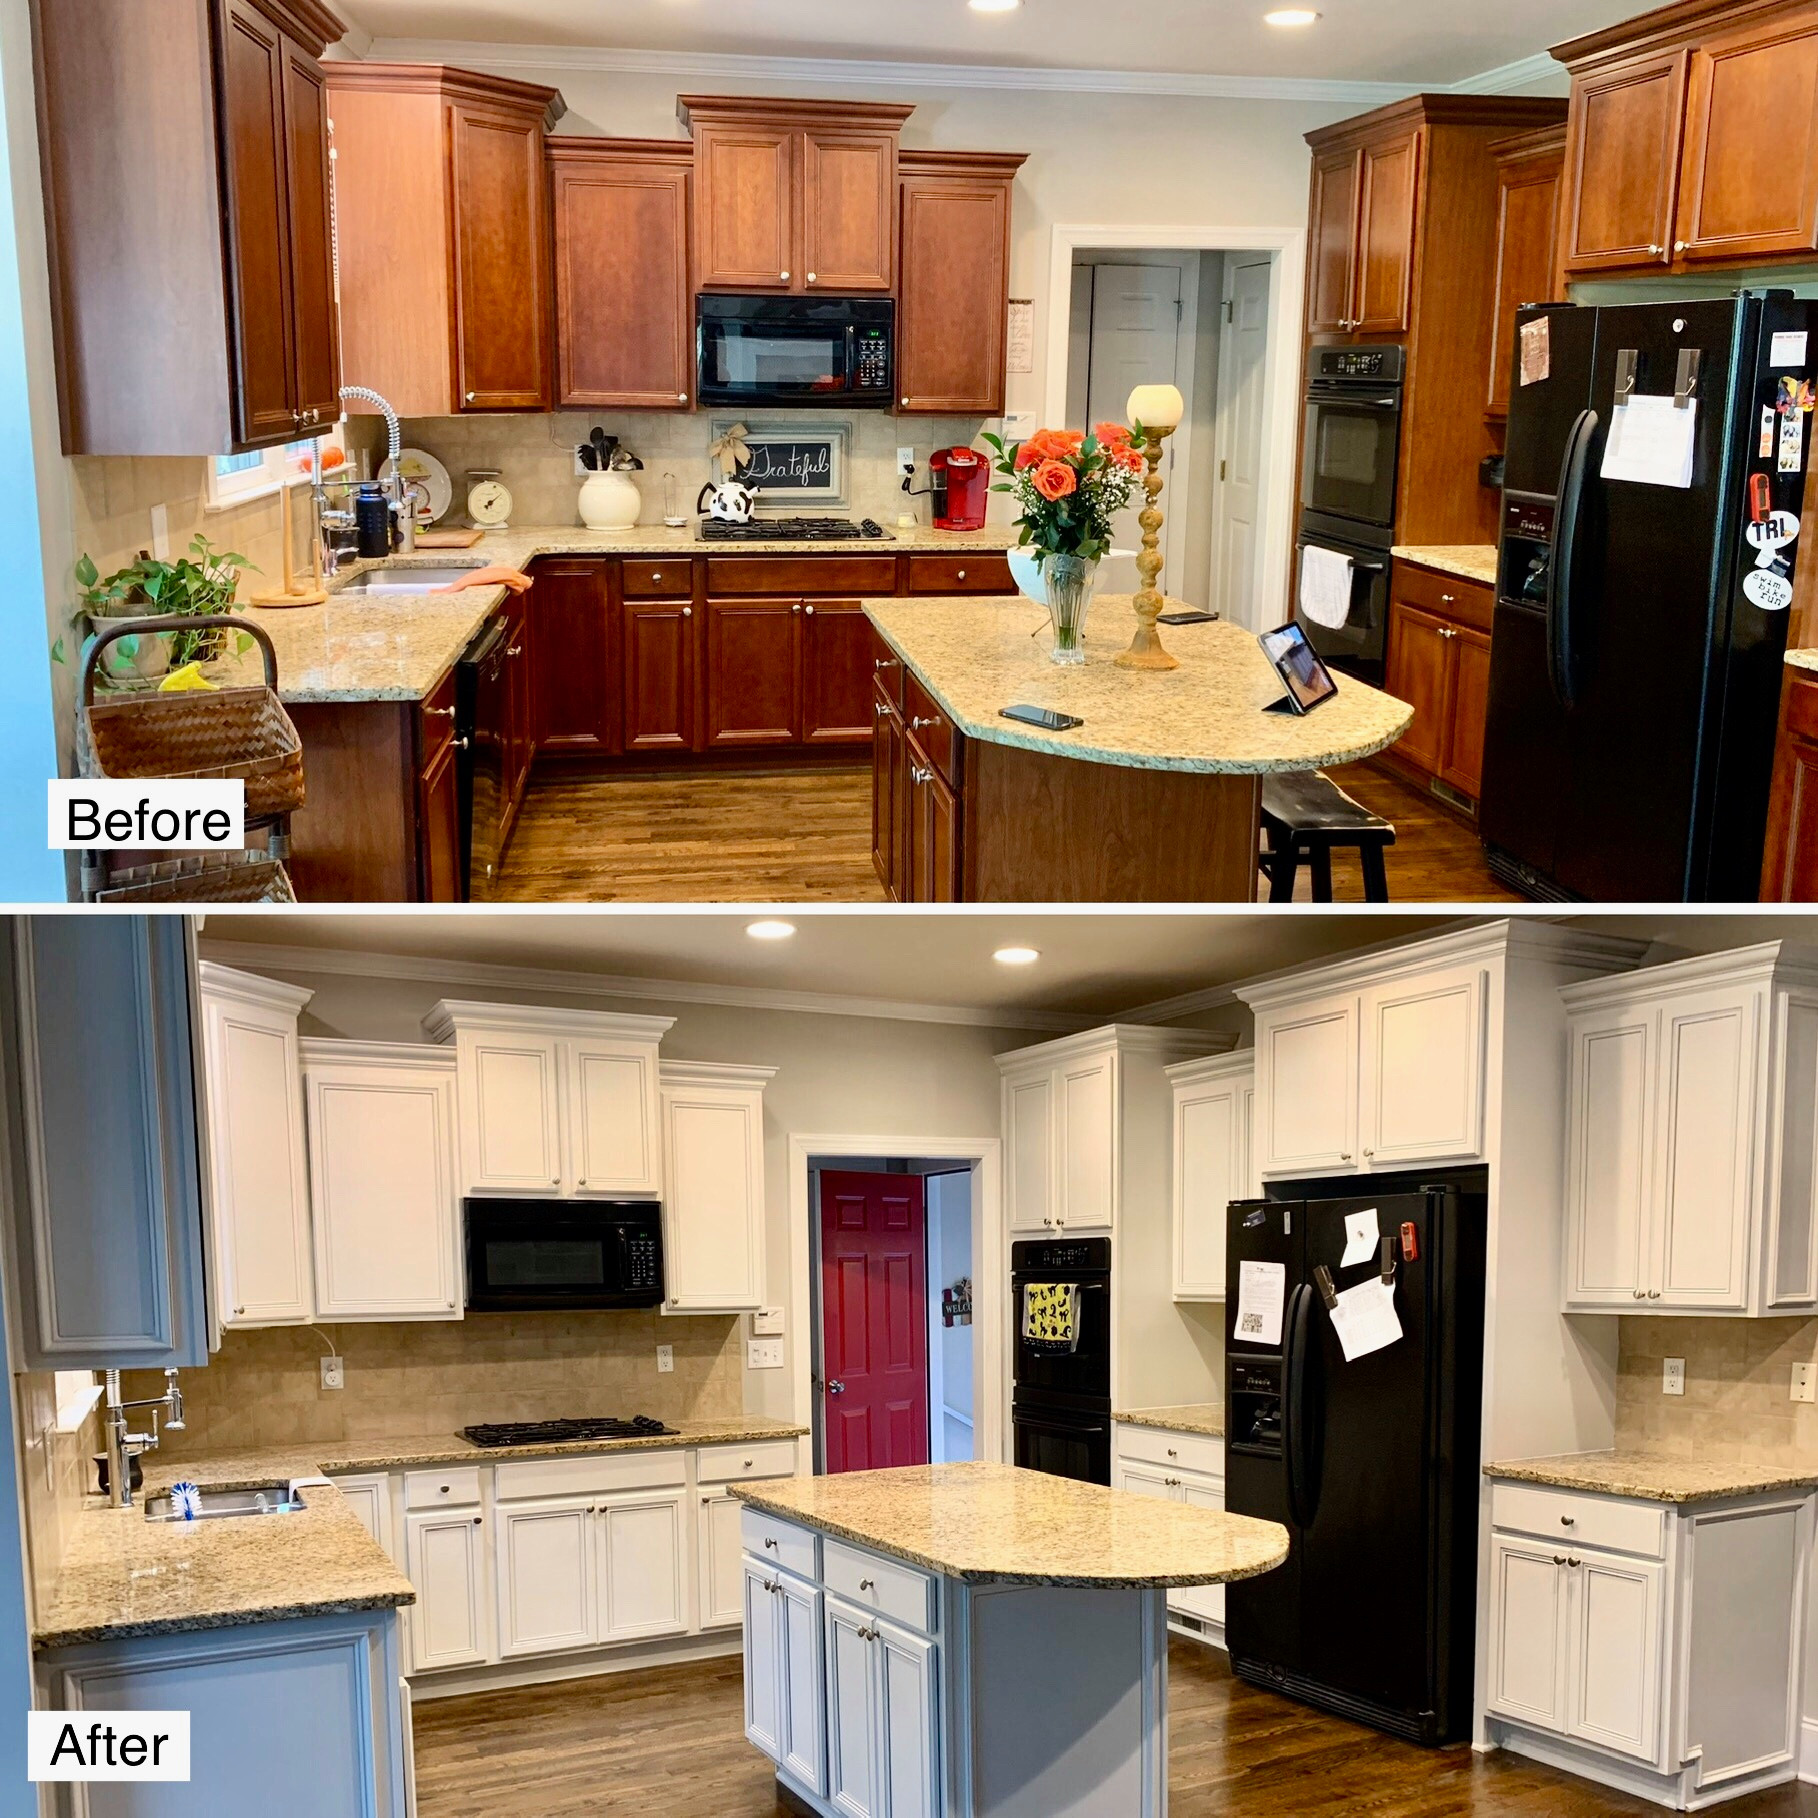 Before/After Kitchen cabinets